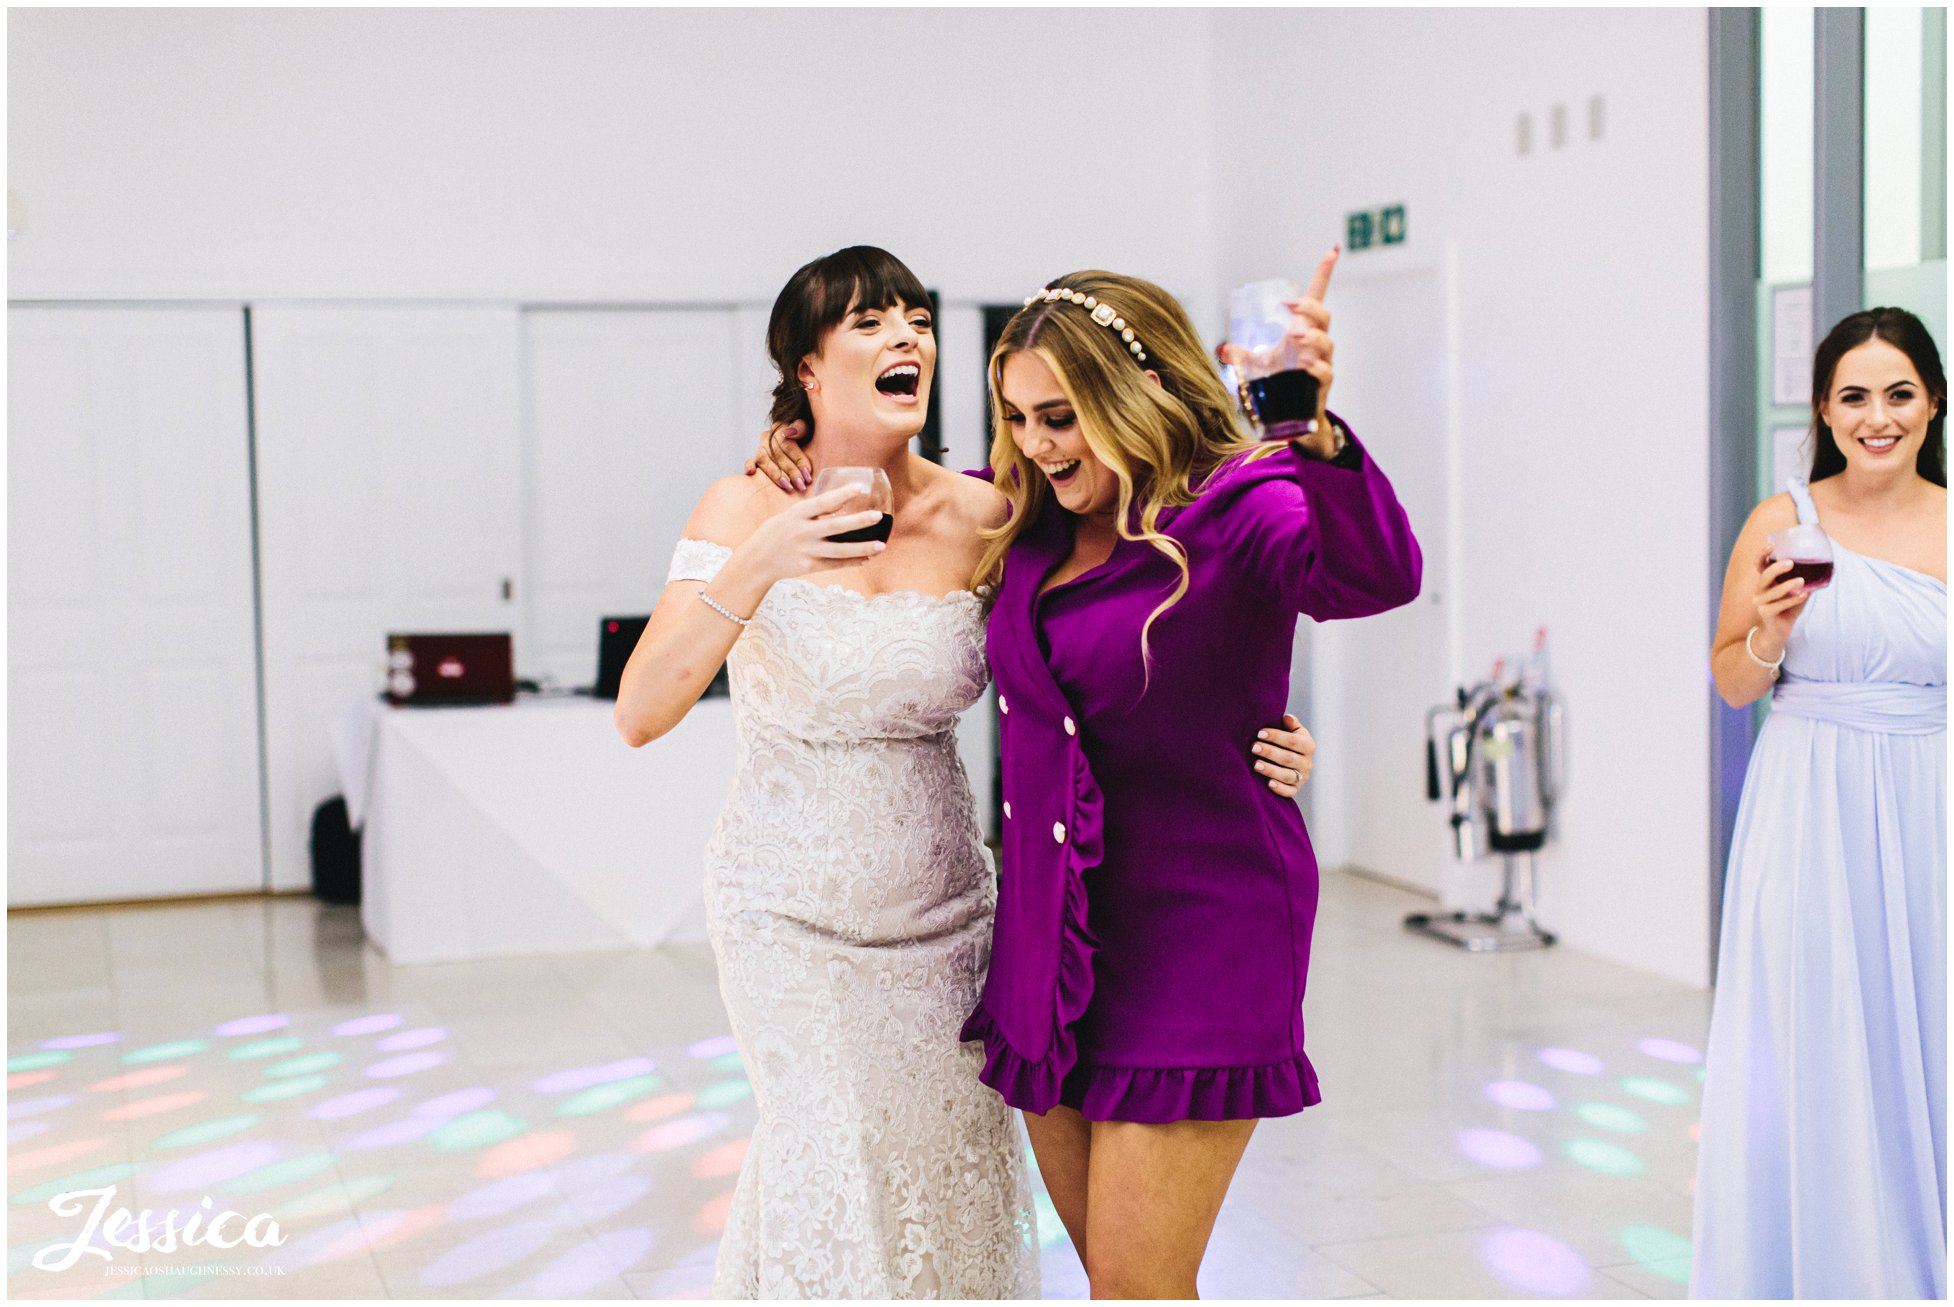 bride dances with her friend during the wedding reception